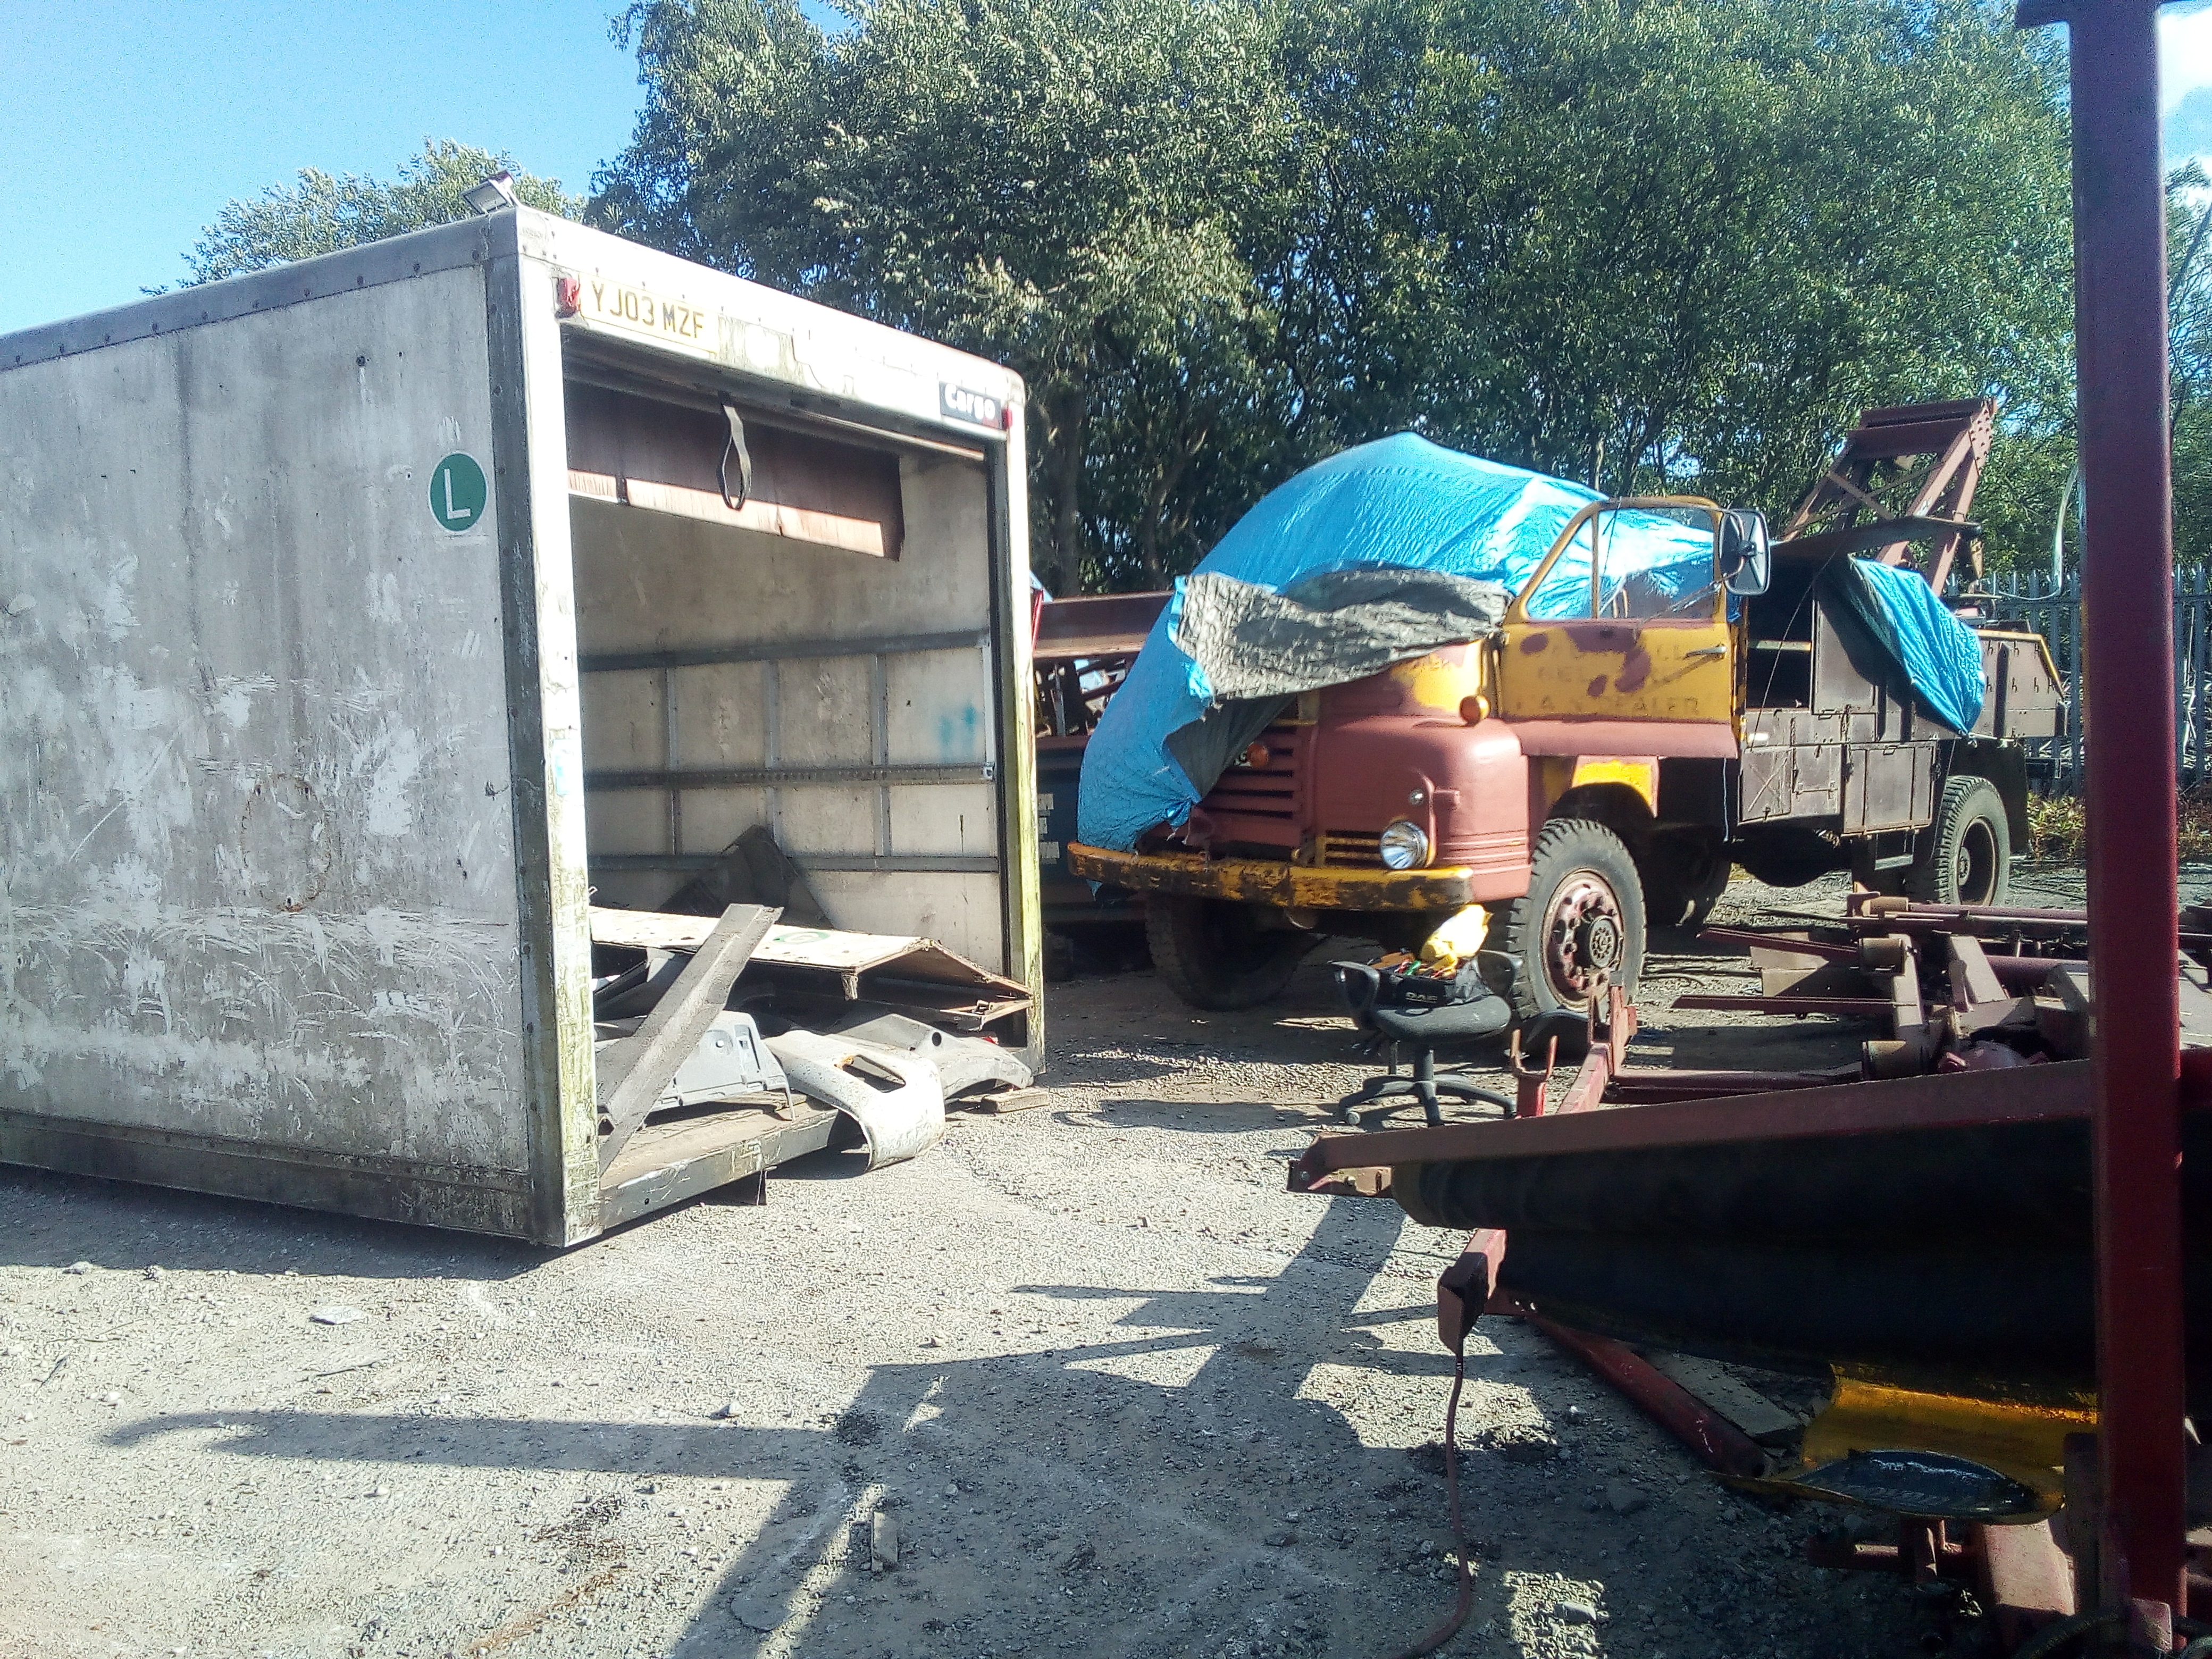 The Bedford boxed in by scrap on all sides. A scrap-filled dump
truck body to the right, a scrap hookloader equipment to the left, and
a box-truck body dumped in front of it.